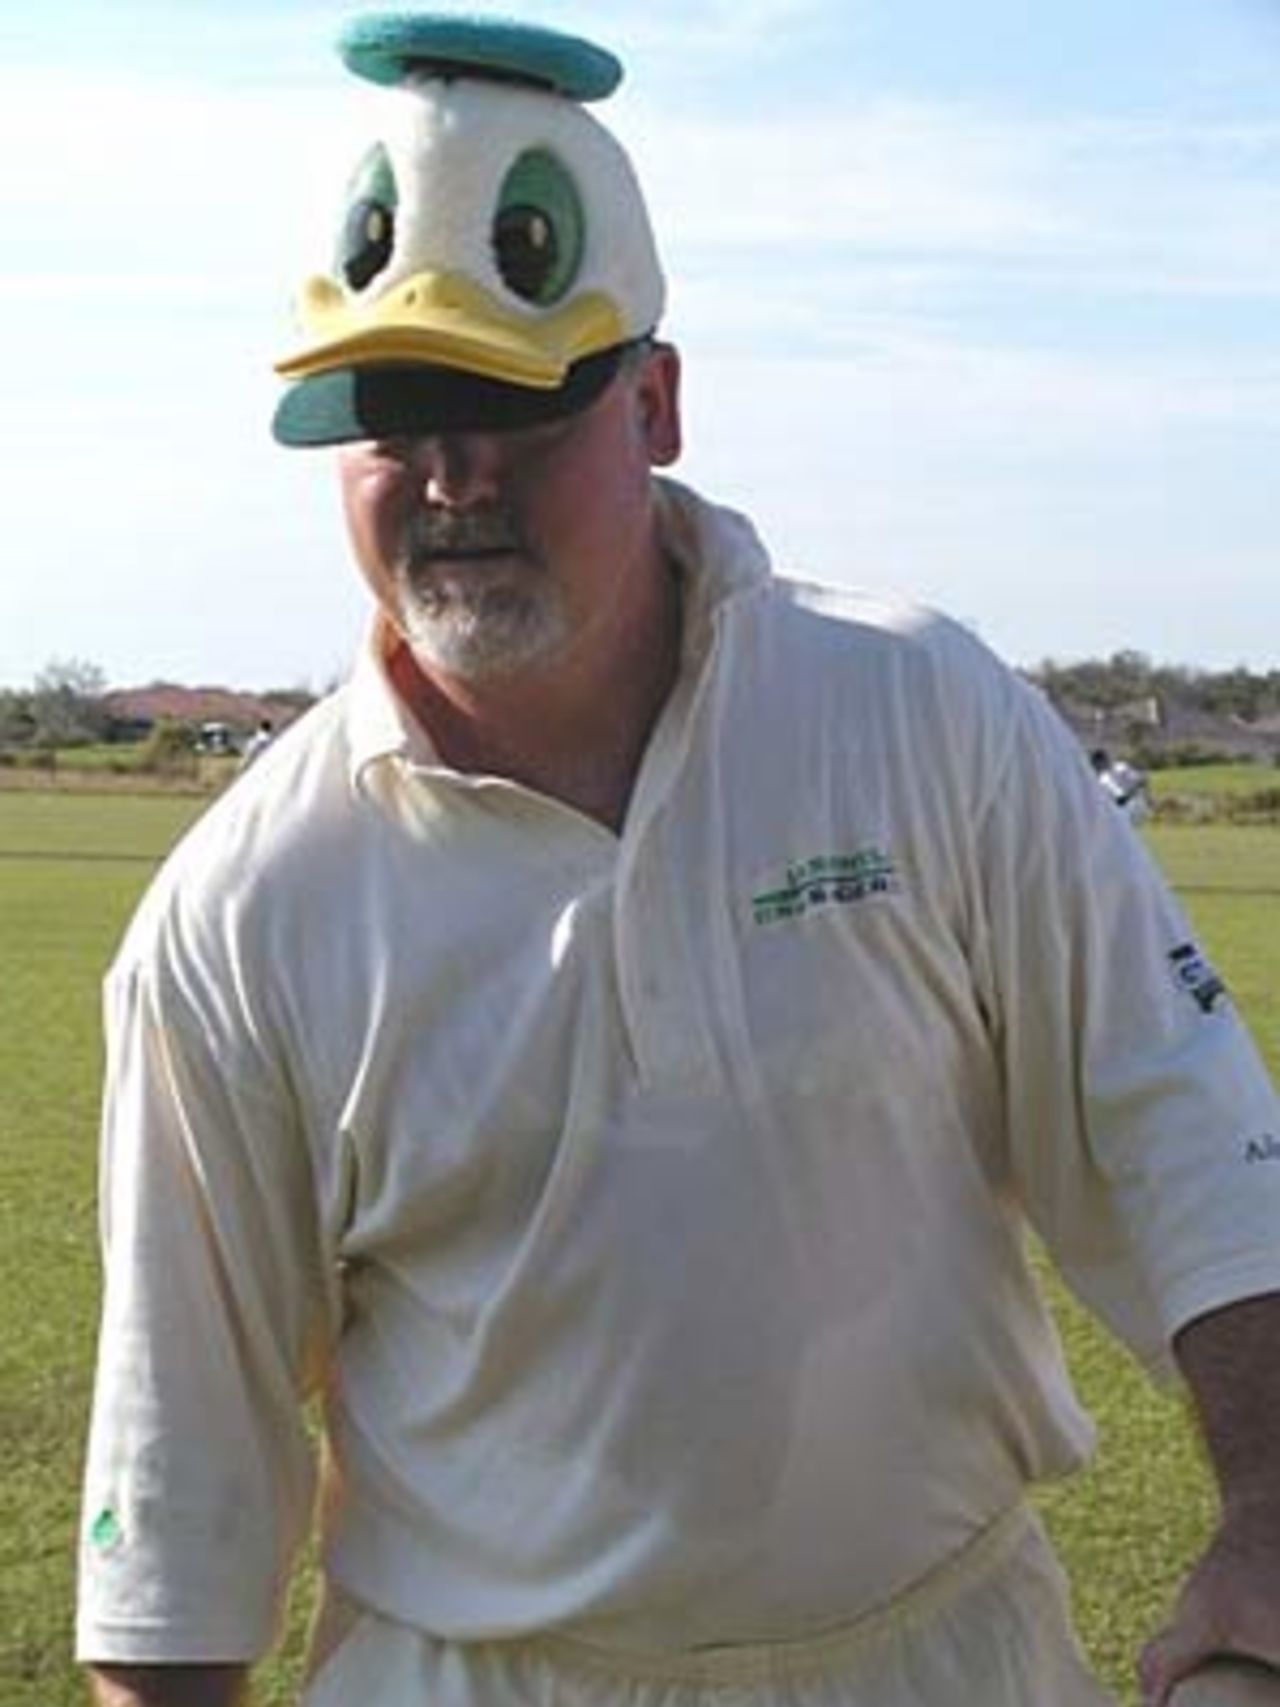 Mike Gatting ... with a duck on his head, Sarasota Six-a-Side, November 25, 2001